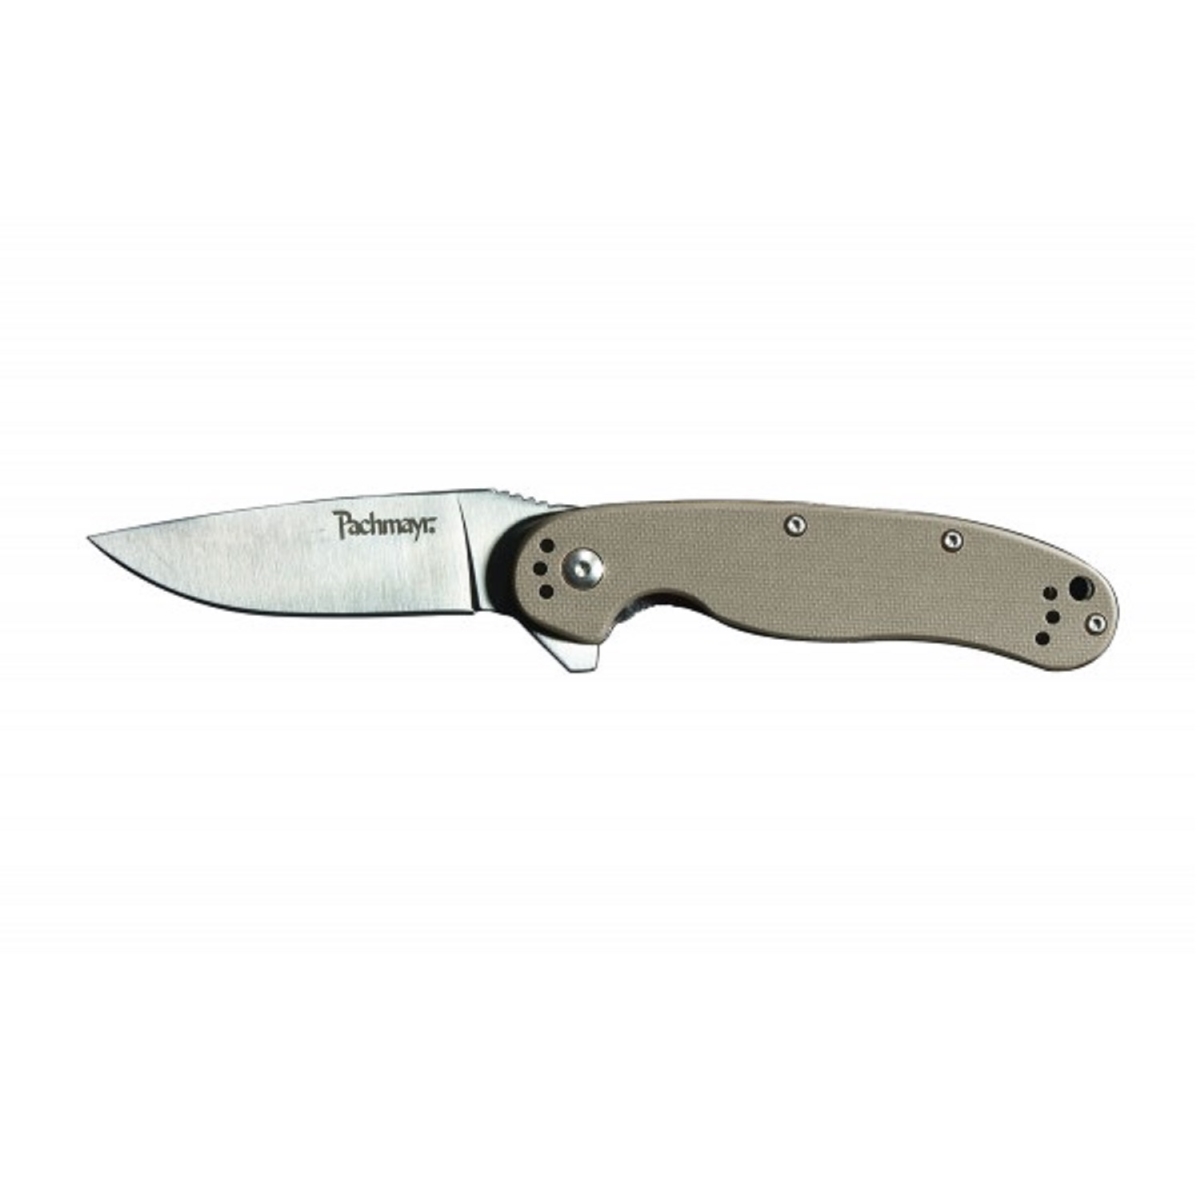 4019399 2.85 In. Snare Folder Knife Blade With G-10 Handle, Fde